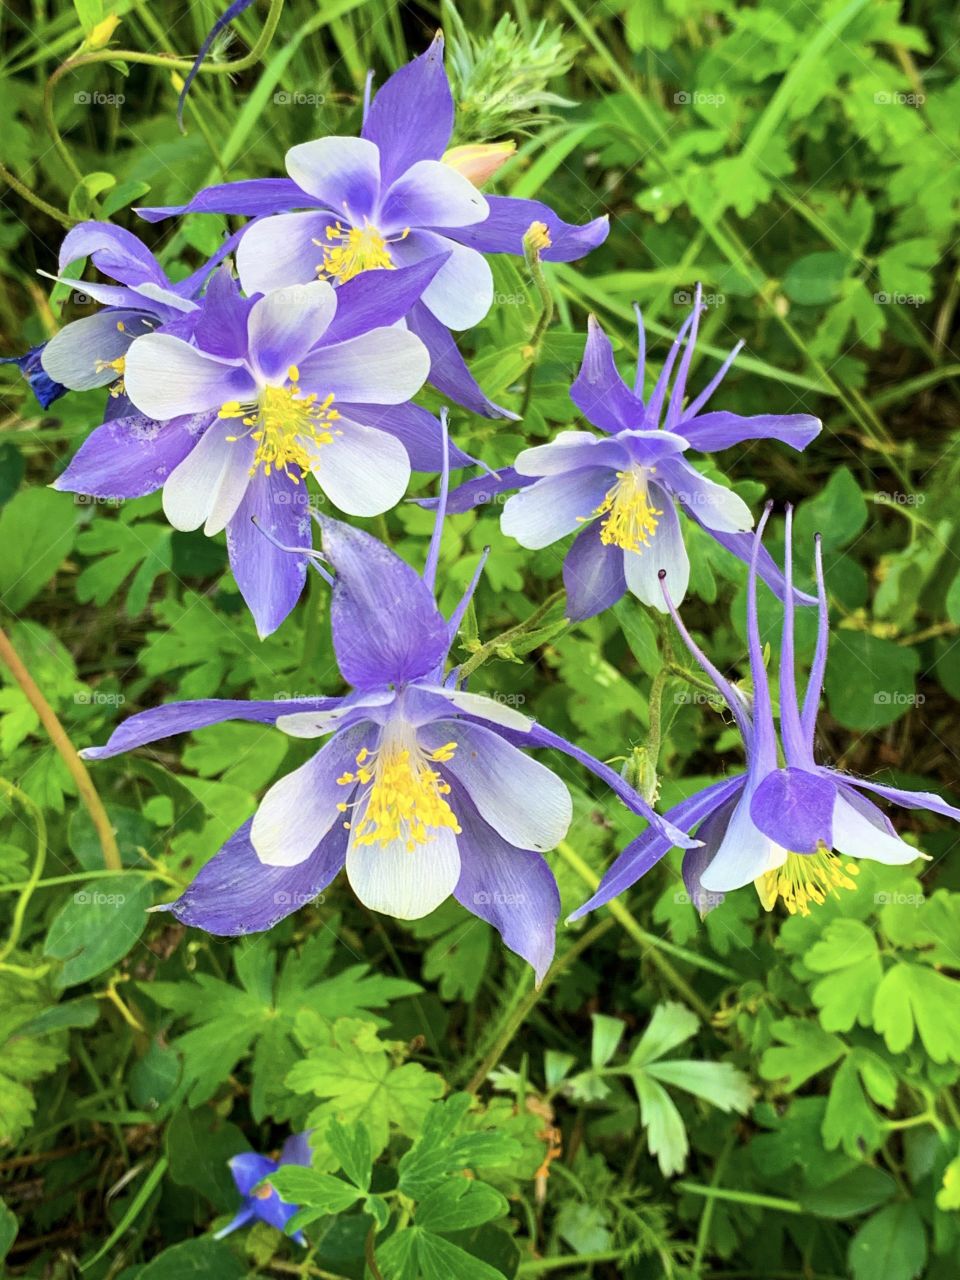 Beautiful Colorado blue columbine flowers peek out onto a hiking trail. These purple and white blooms bring bright color to the wildflowers in the Rocky Mountain wilderness.